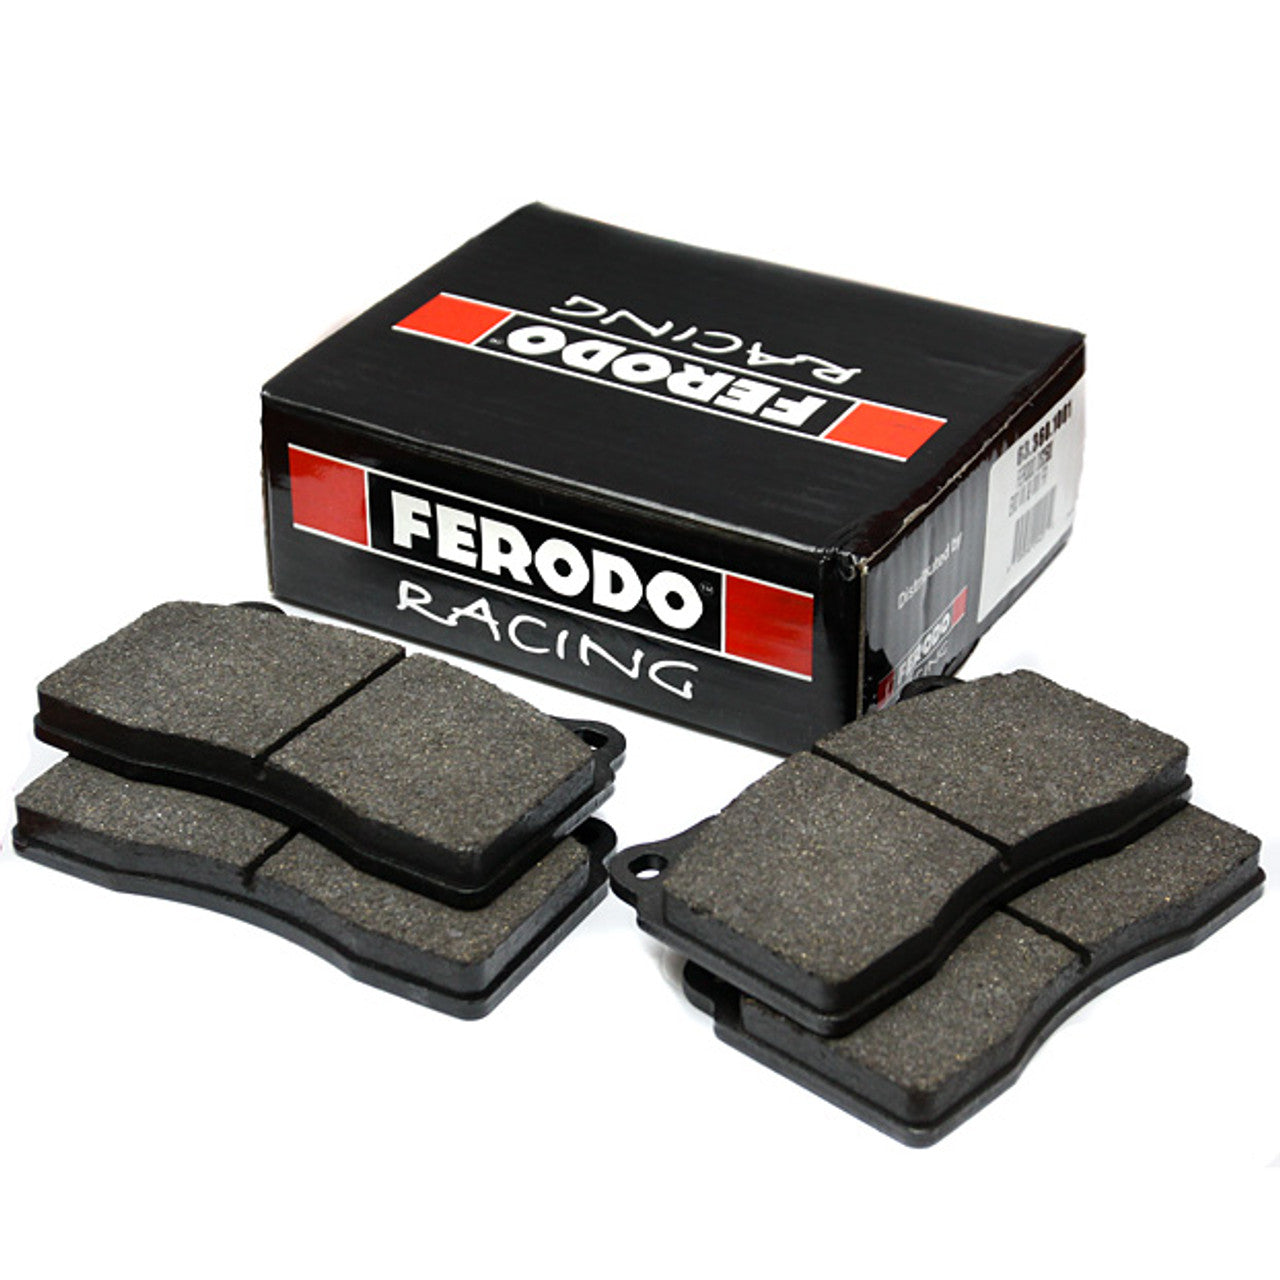 Ferodo Racing DS2500 Front Brake Pads - VW Golf 'GTI' and 'GTD' Mk7